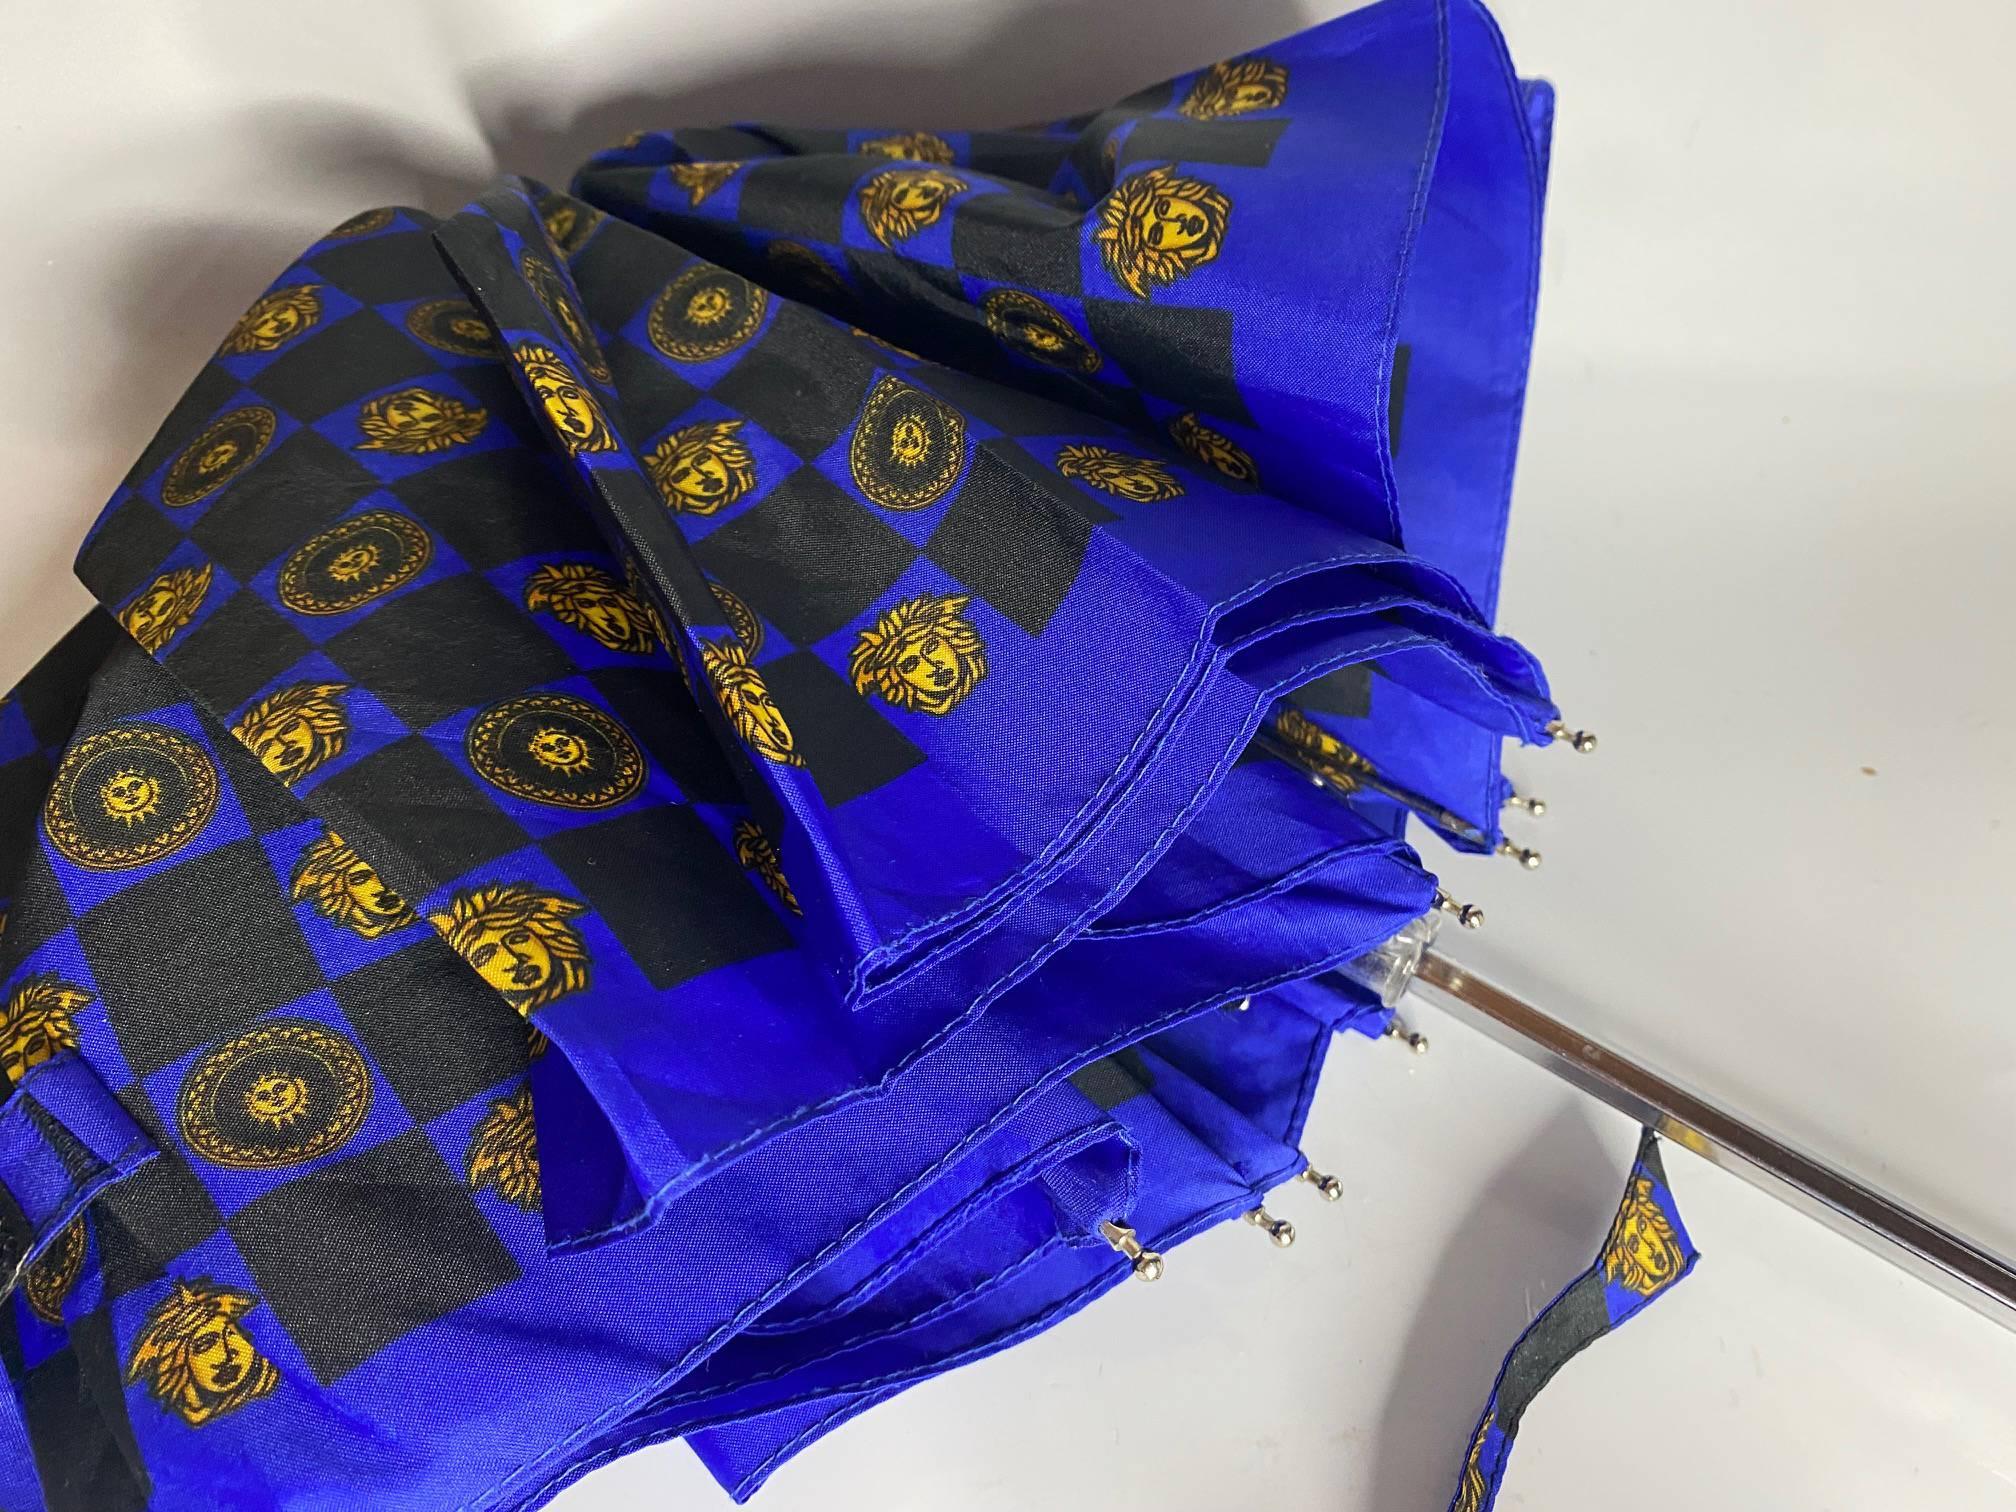 1980s Gianni Versace Medusa Blue Umbrella  In Good Condition For Sale In London, GB